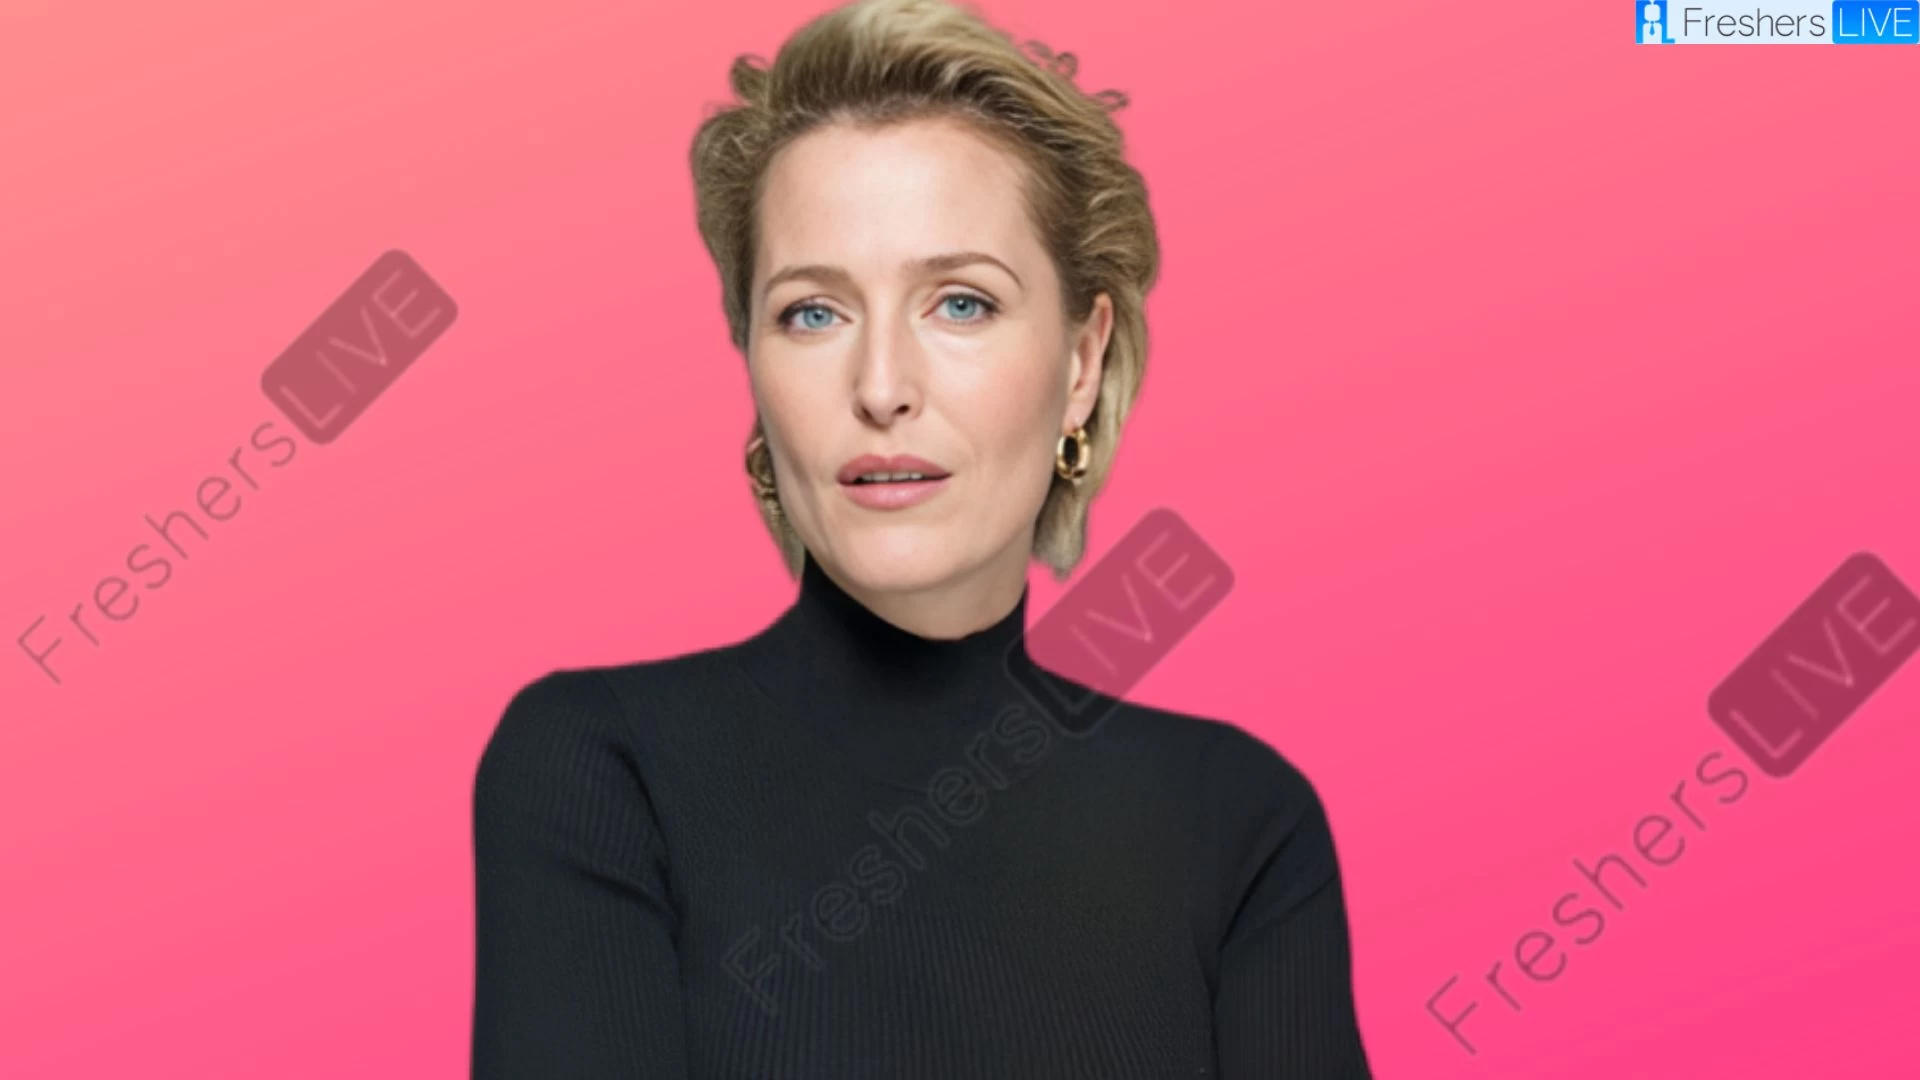 Gillian Anderson Ethnicity, What is Gillian Anderson's Ethnicity?